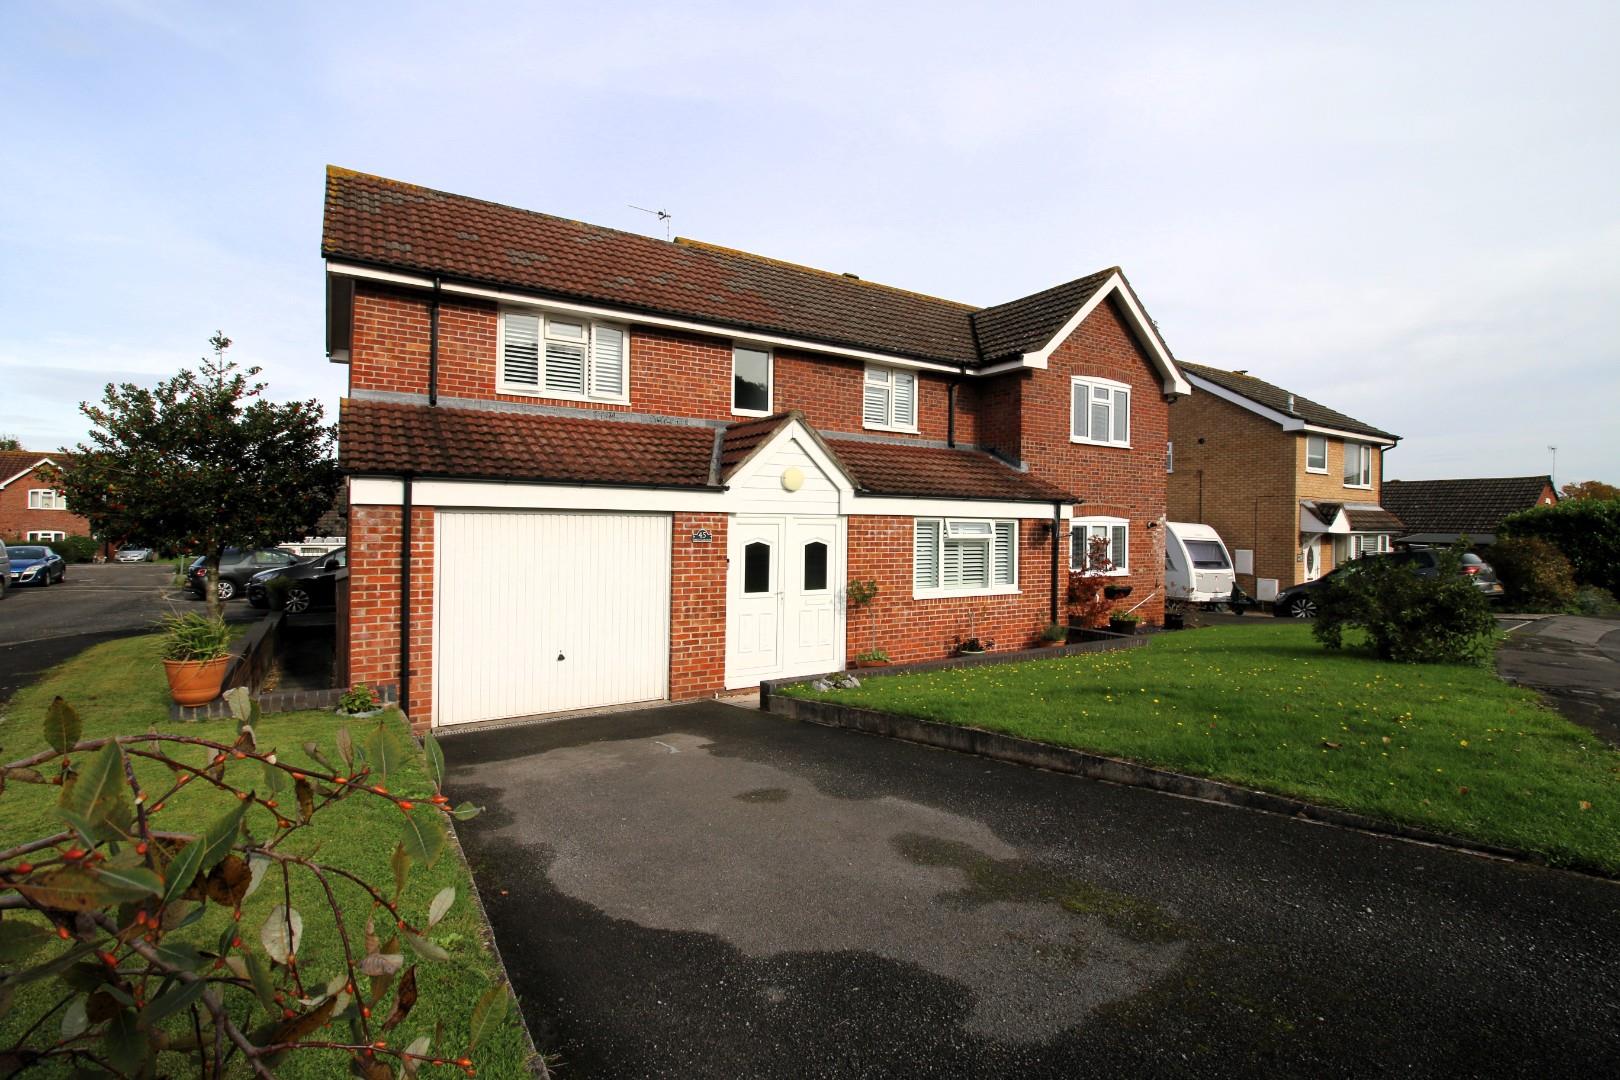 Three bedroom family home, finished to an exceptional standard within the village of Banwell